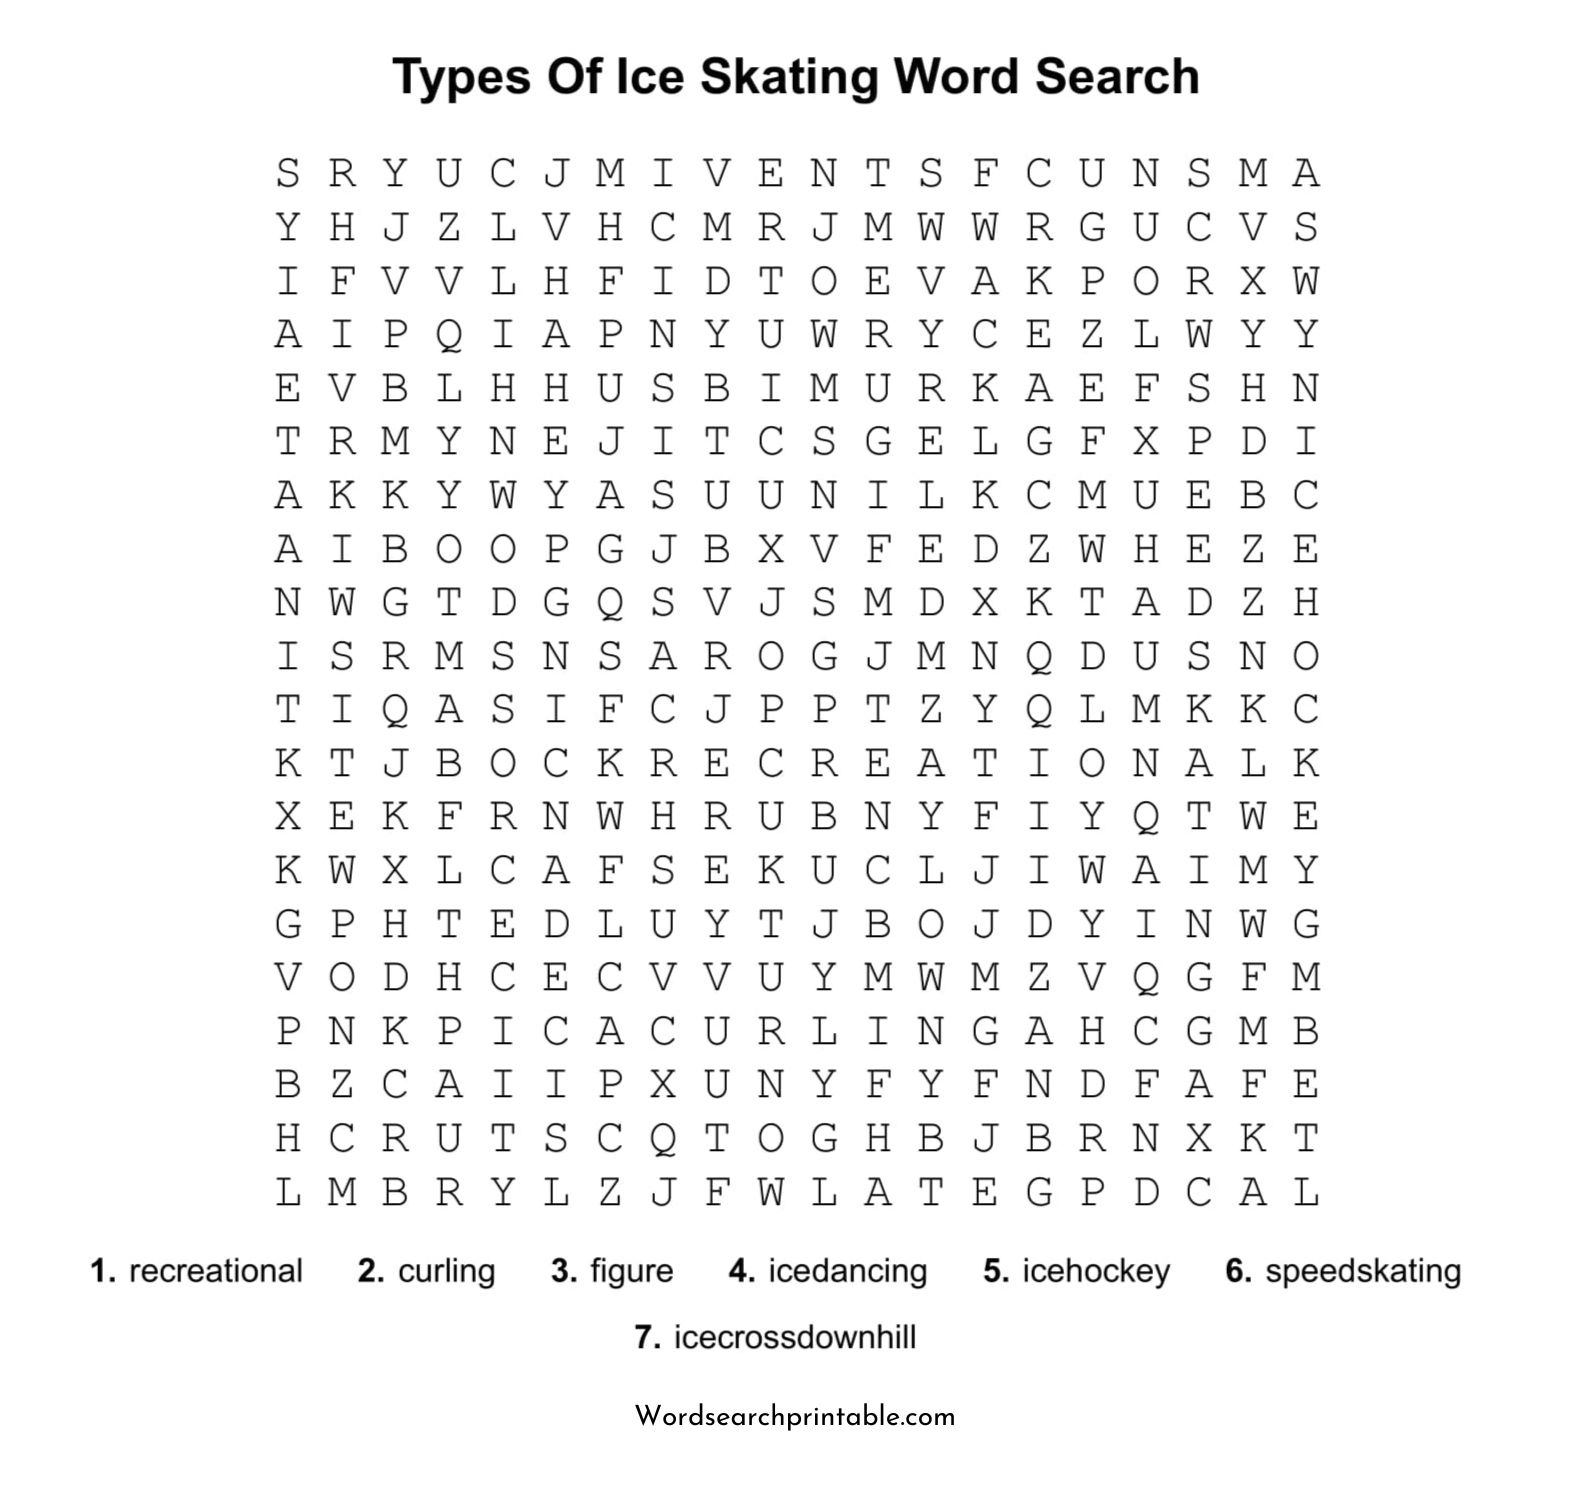 types of ice skating word search puzzles